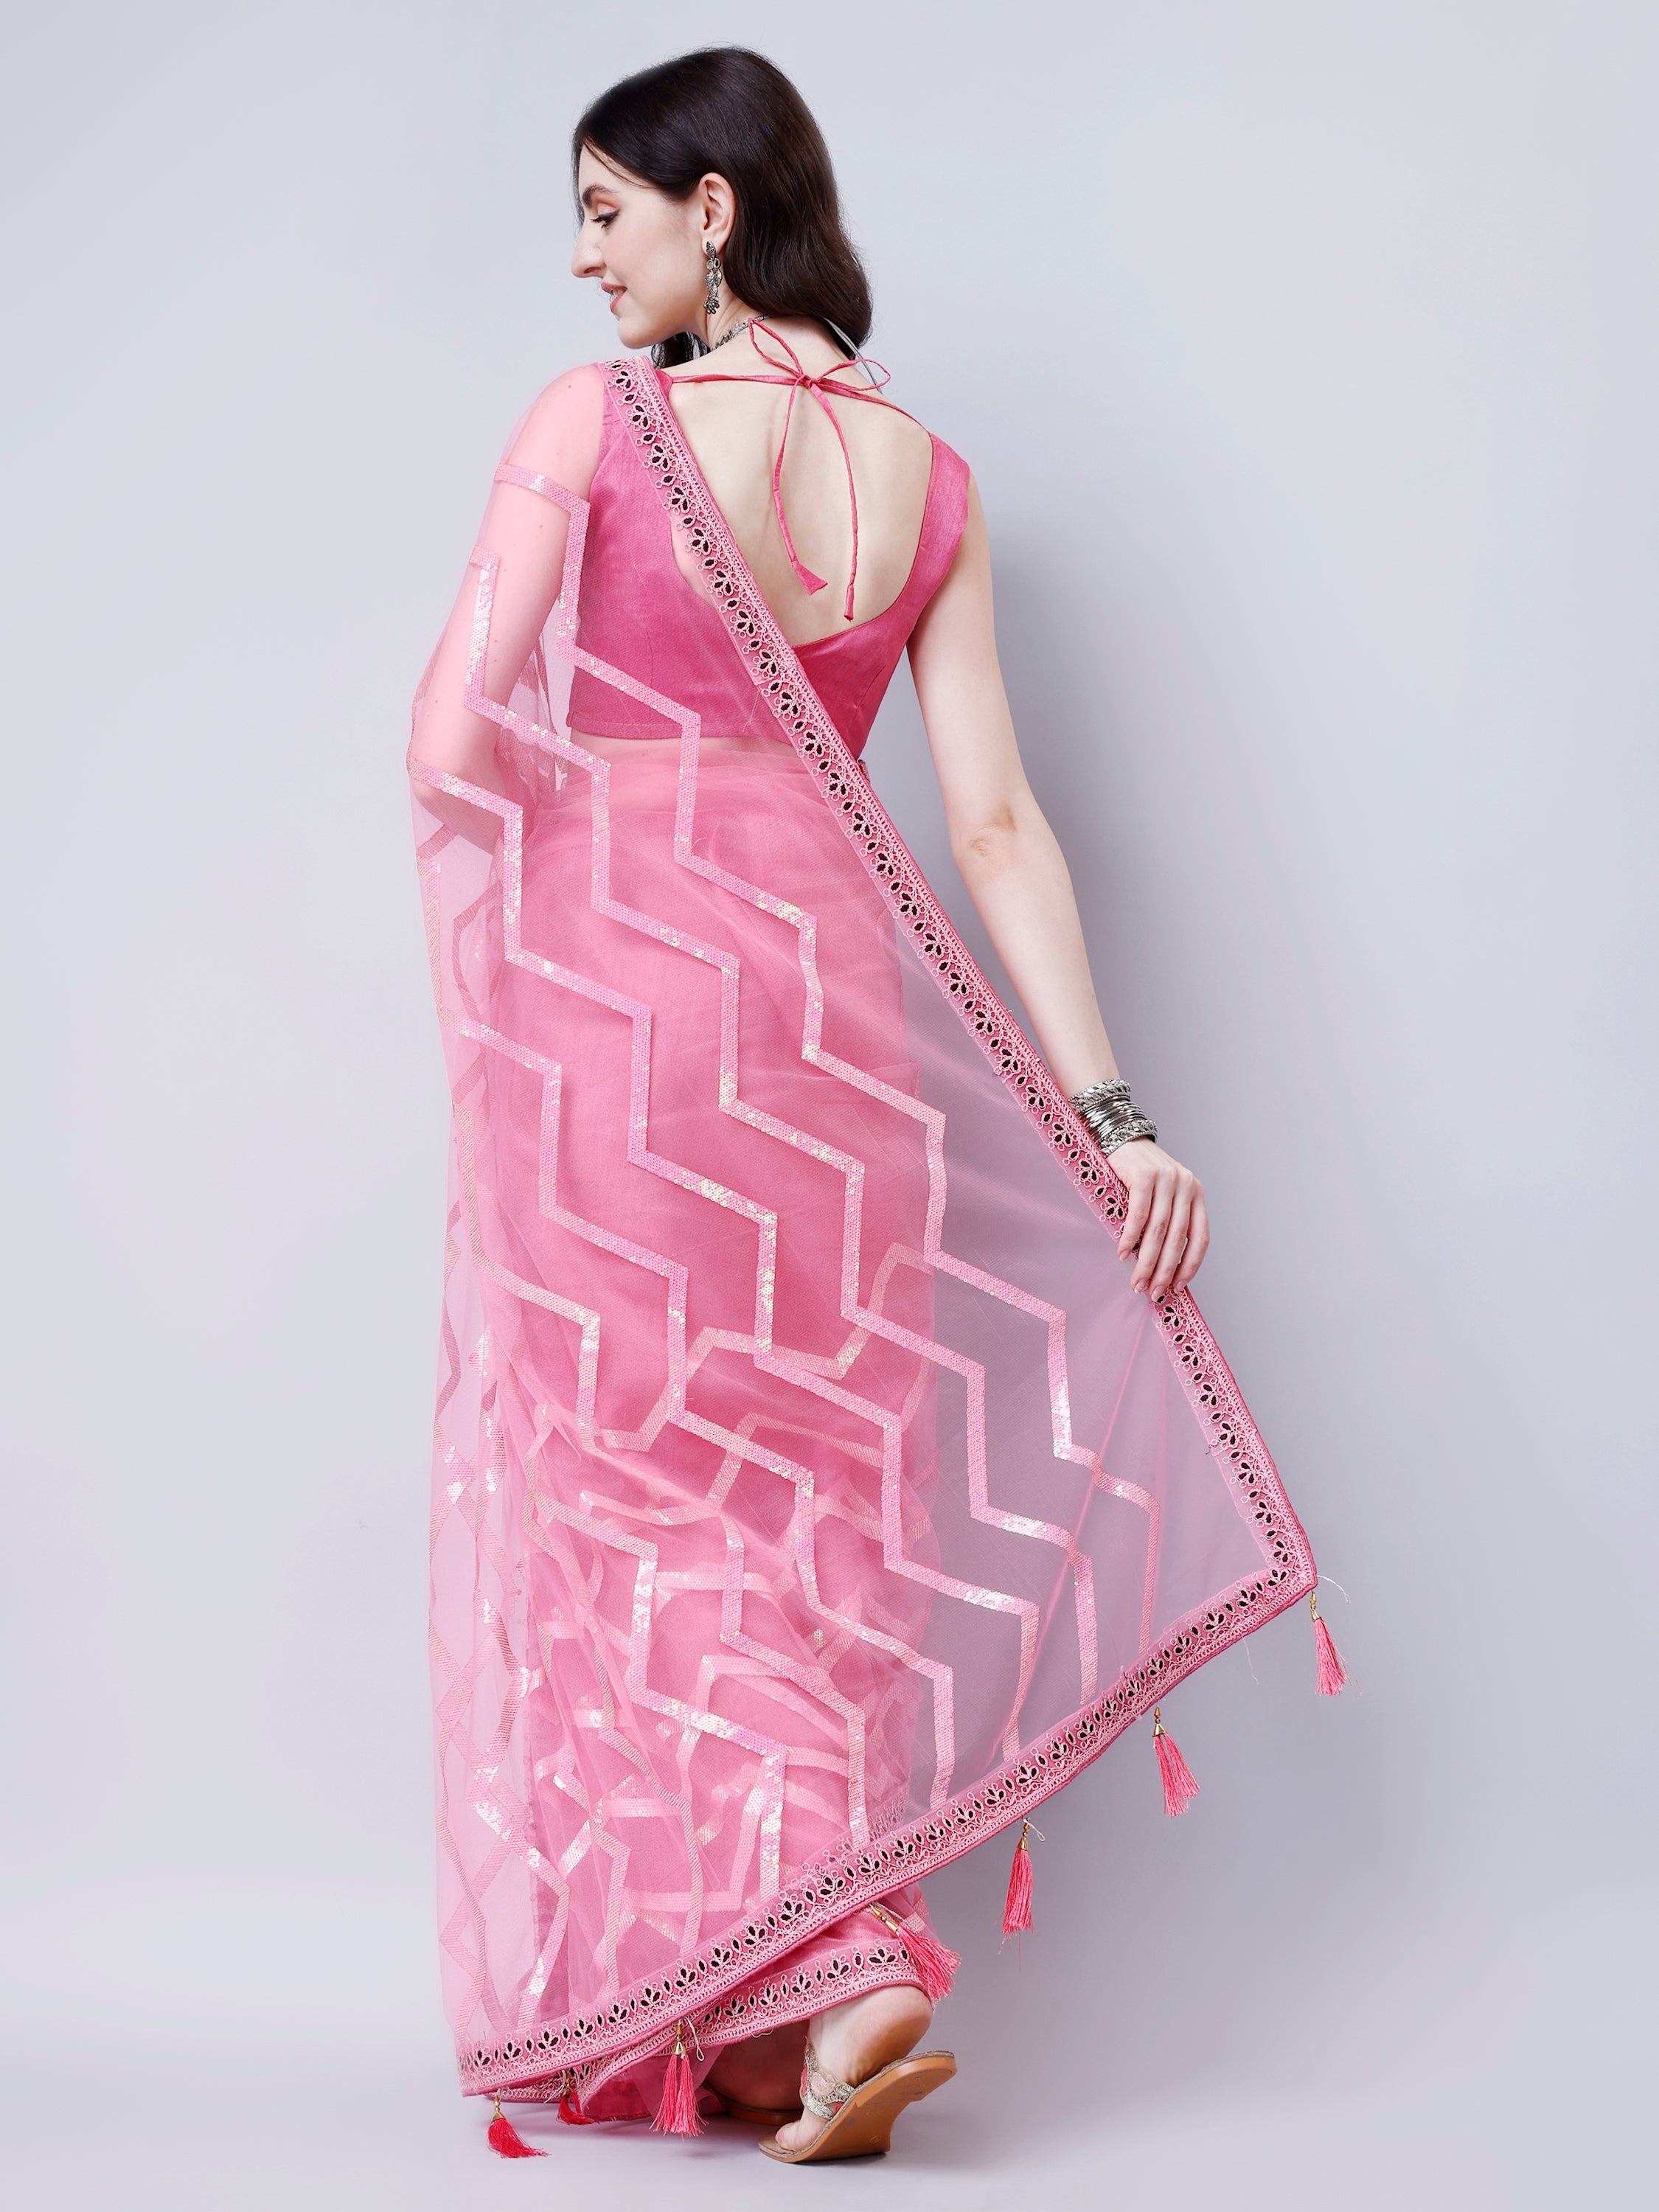 Hot Pink Embroidered Sequin Net Saree for Graceful Style and Captivating Beauty